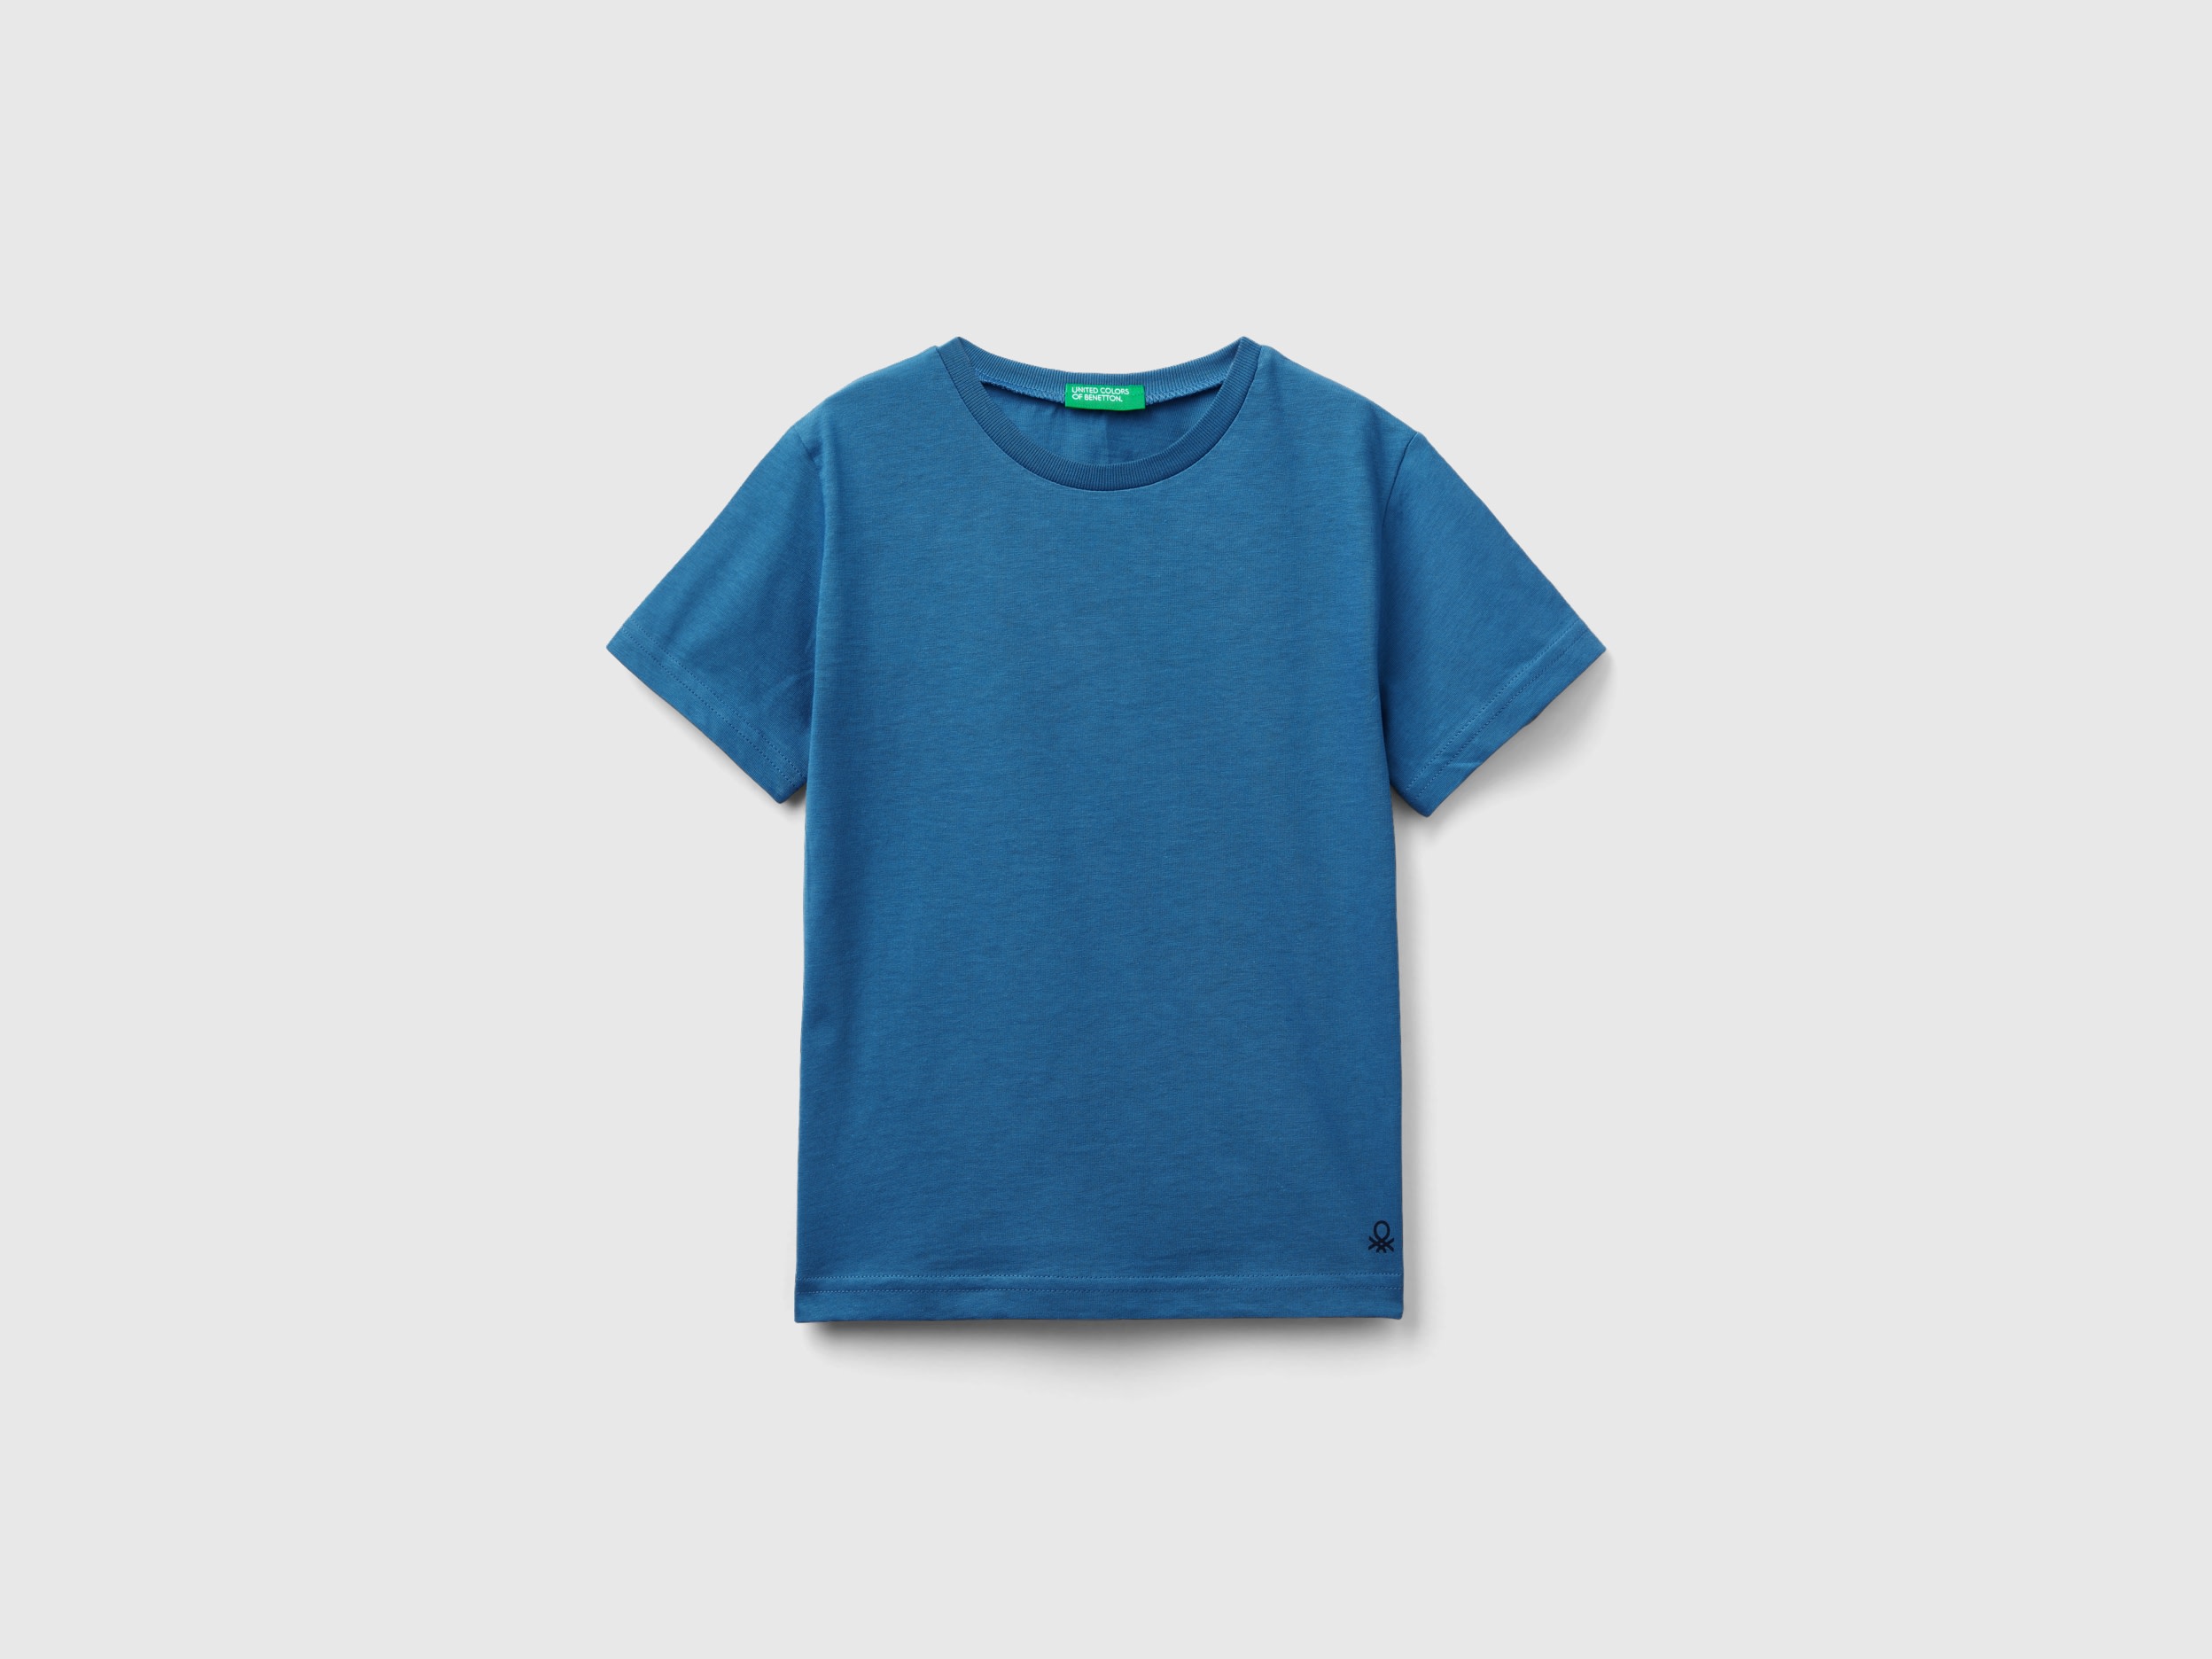 Image of Benetton, T-shirt In Organic Cotton, size 90, Blue, Kids